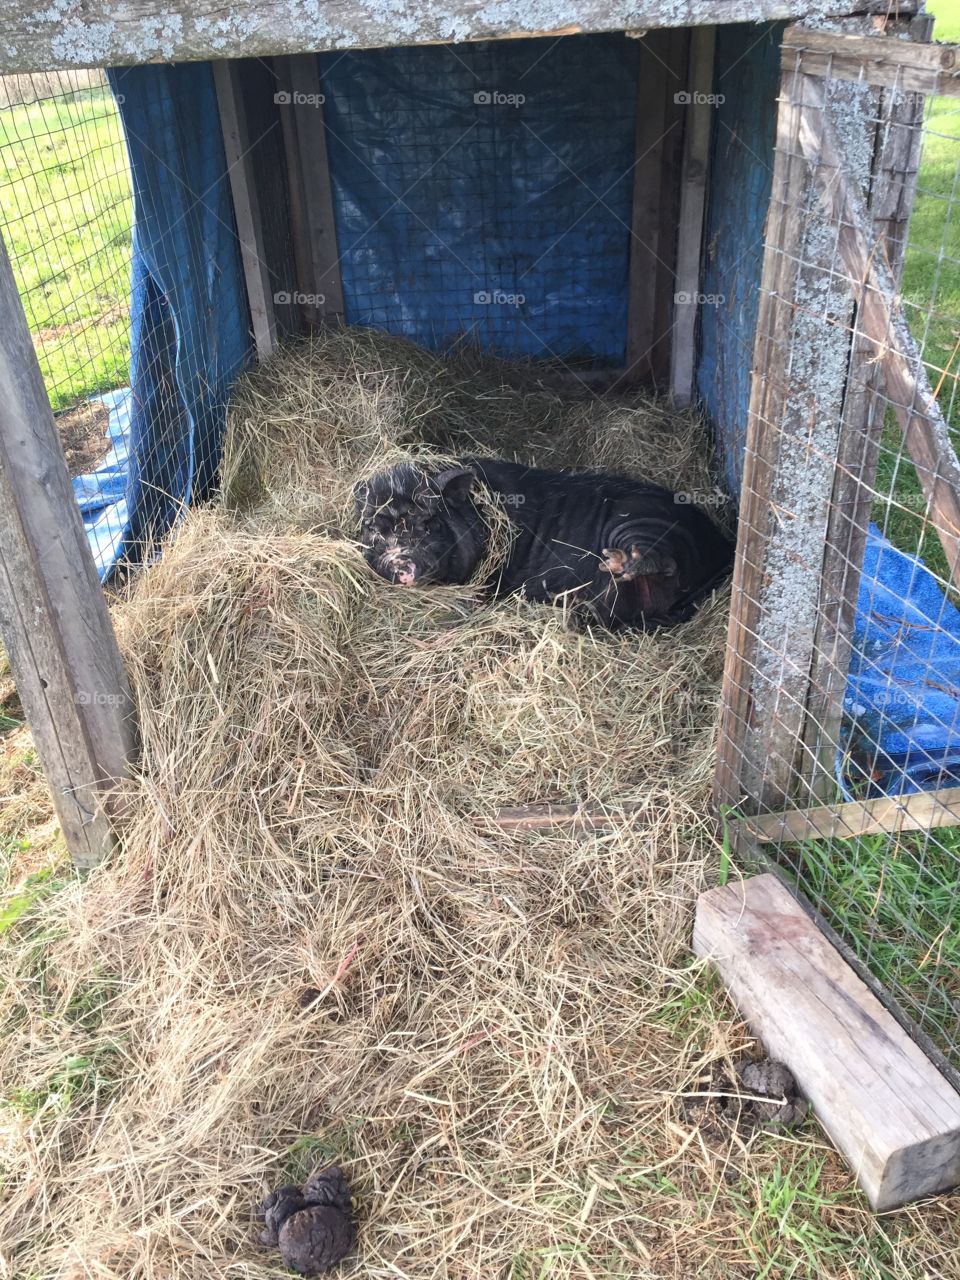 A black potbelly pig sleeps in a pen full of hay.